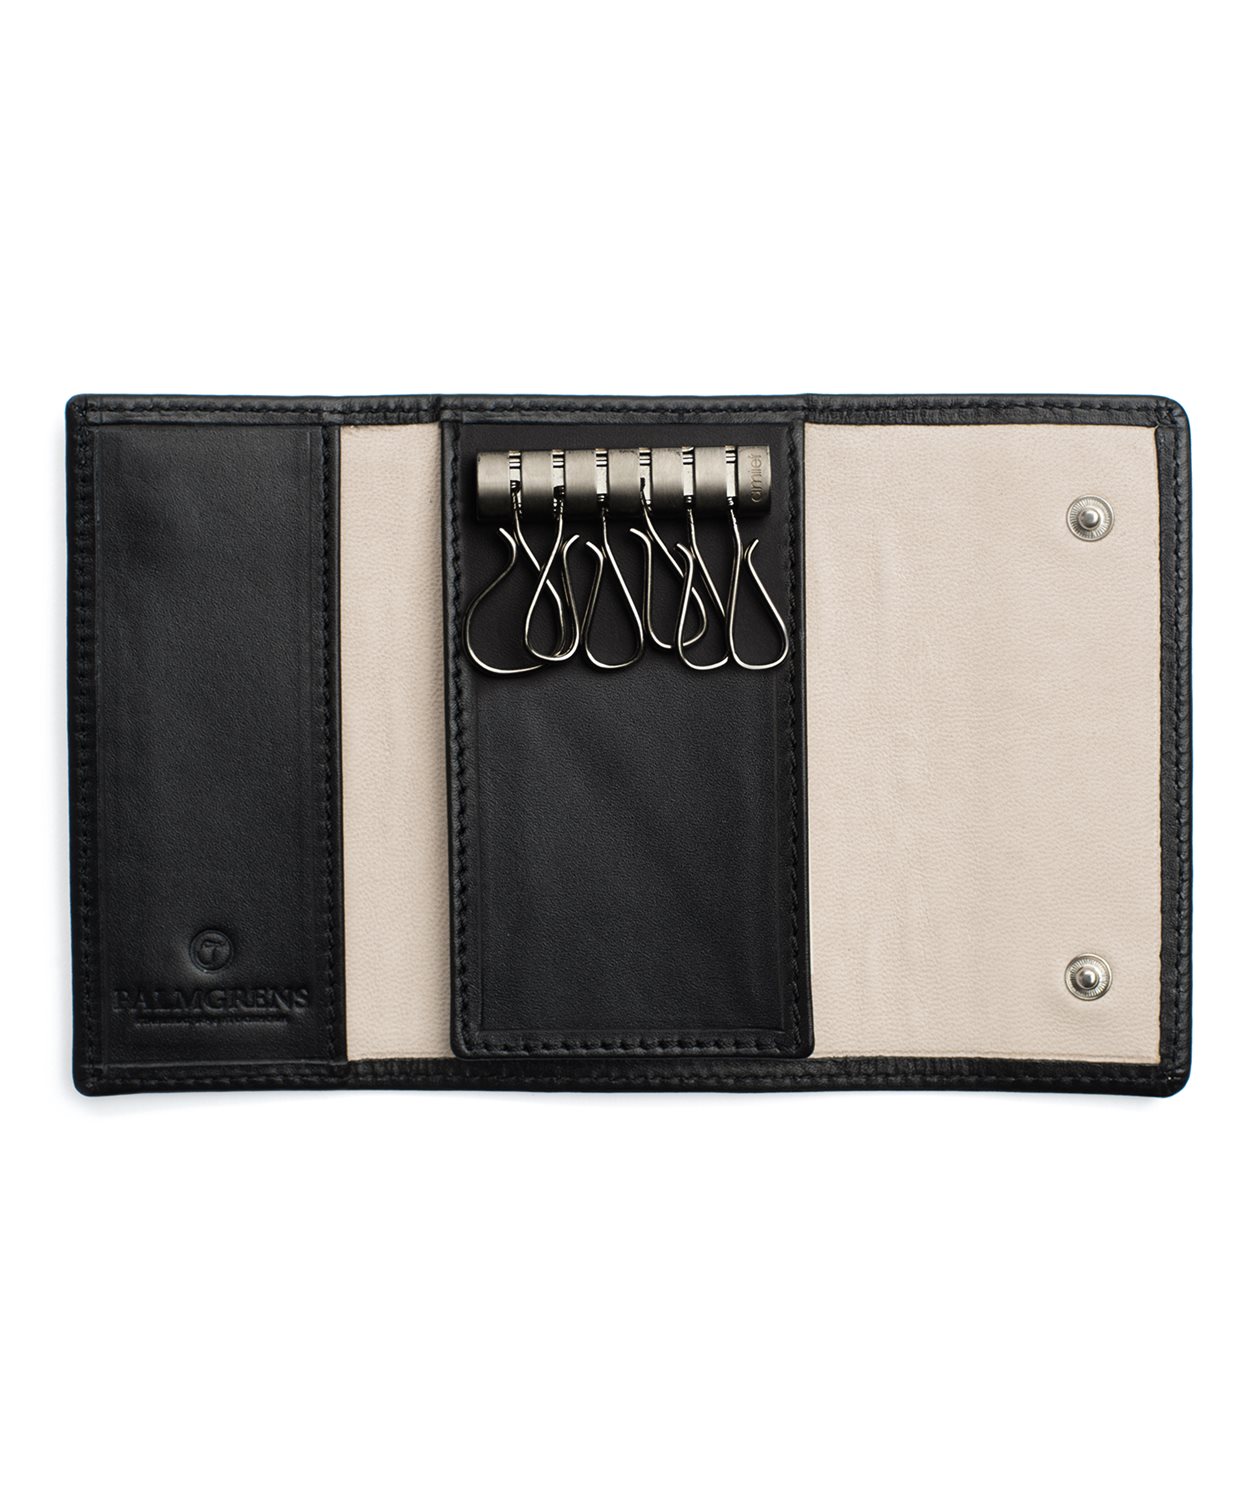 Palmgrens - Key Case - Genuine handcrafted leather since 1896